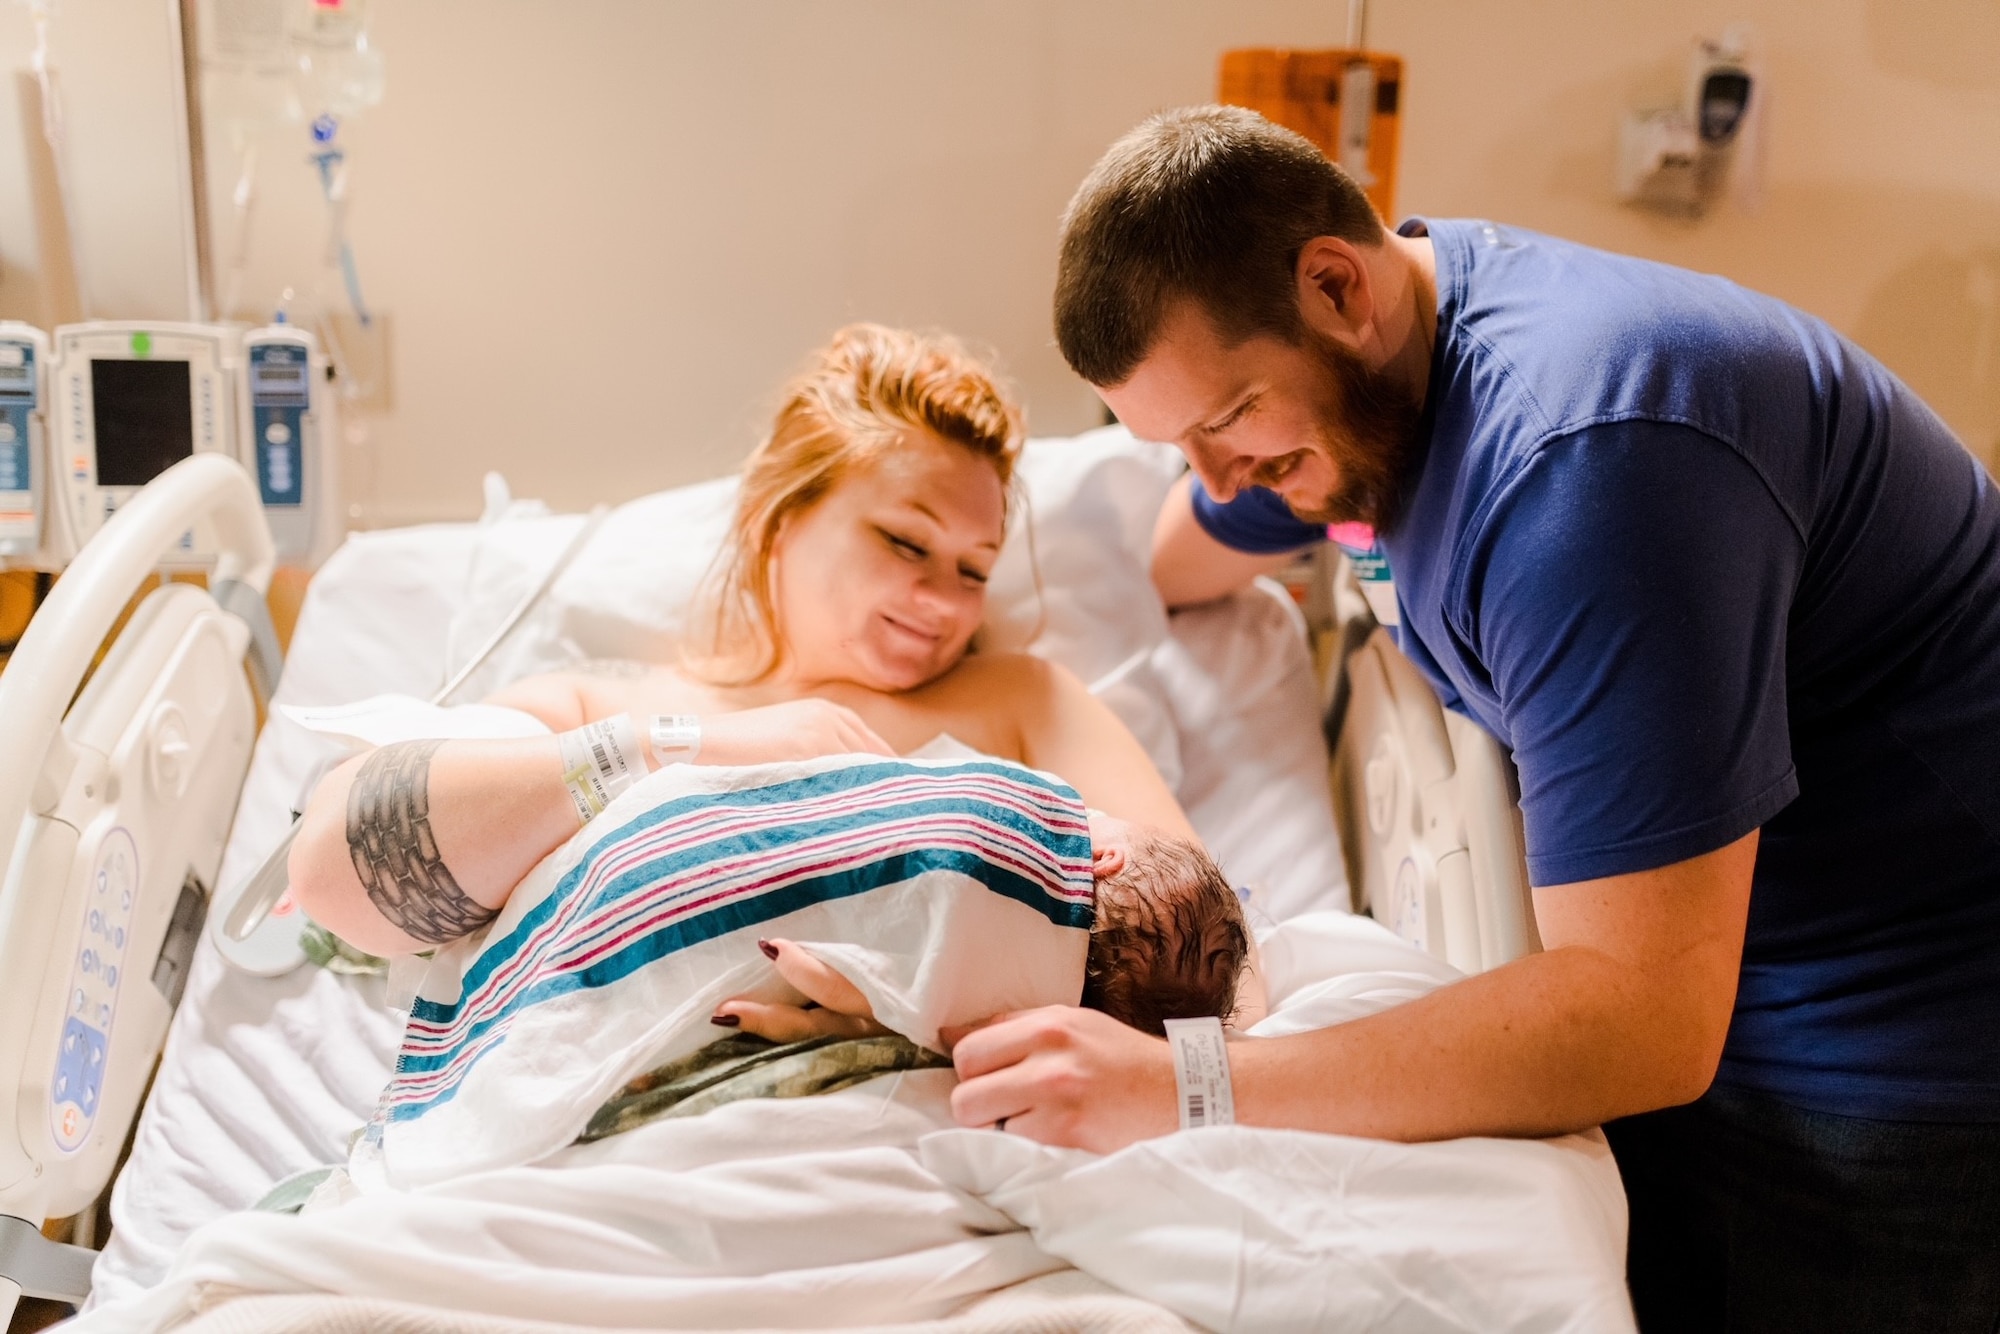 U.S. Air Force Senior Airman Cheyenne Lewis. 325th Fighter Wing public affairs journeyman, and her spouse look upon their newborn son.